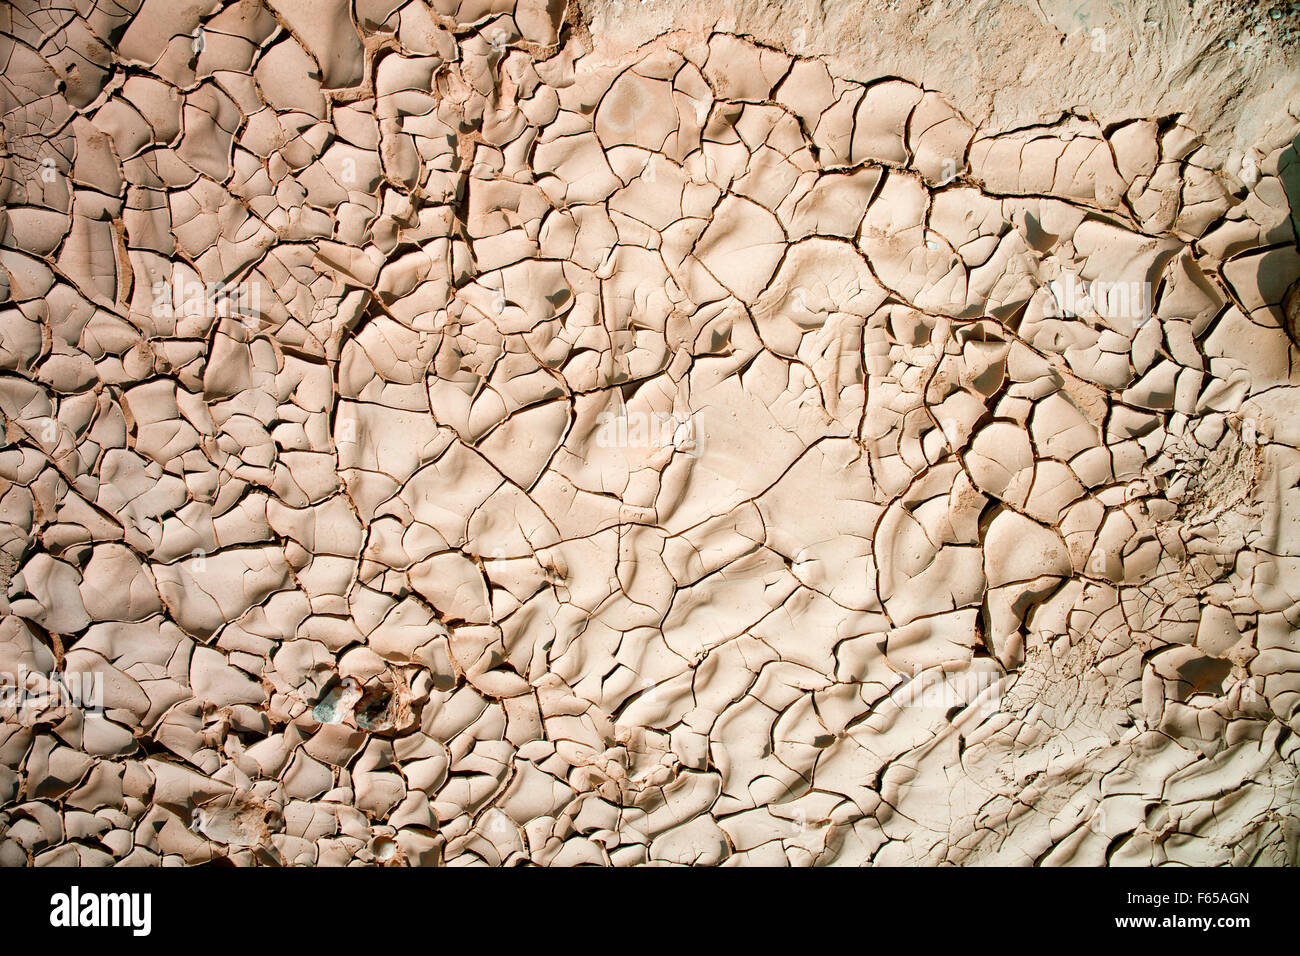 environmental concept, Water shortage and drought Dry cracked mud photographed in the Negev Desert, Israel Stock Photo